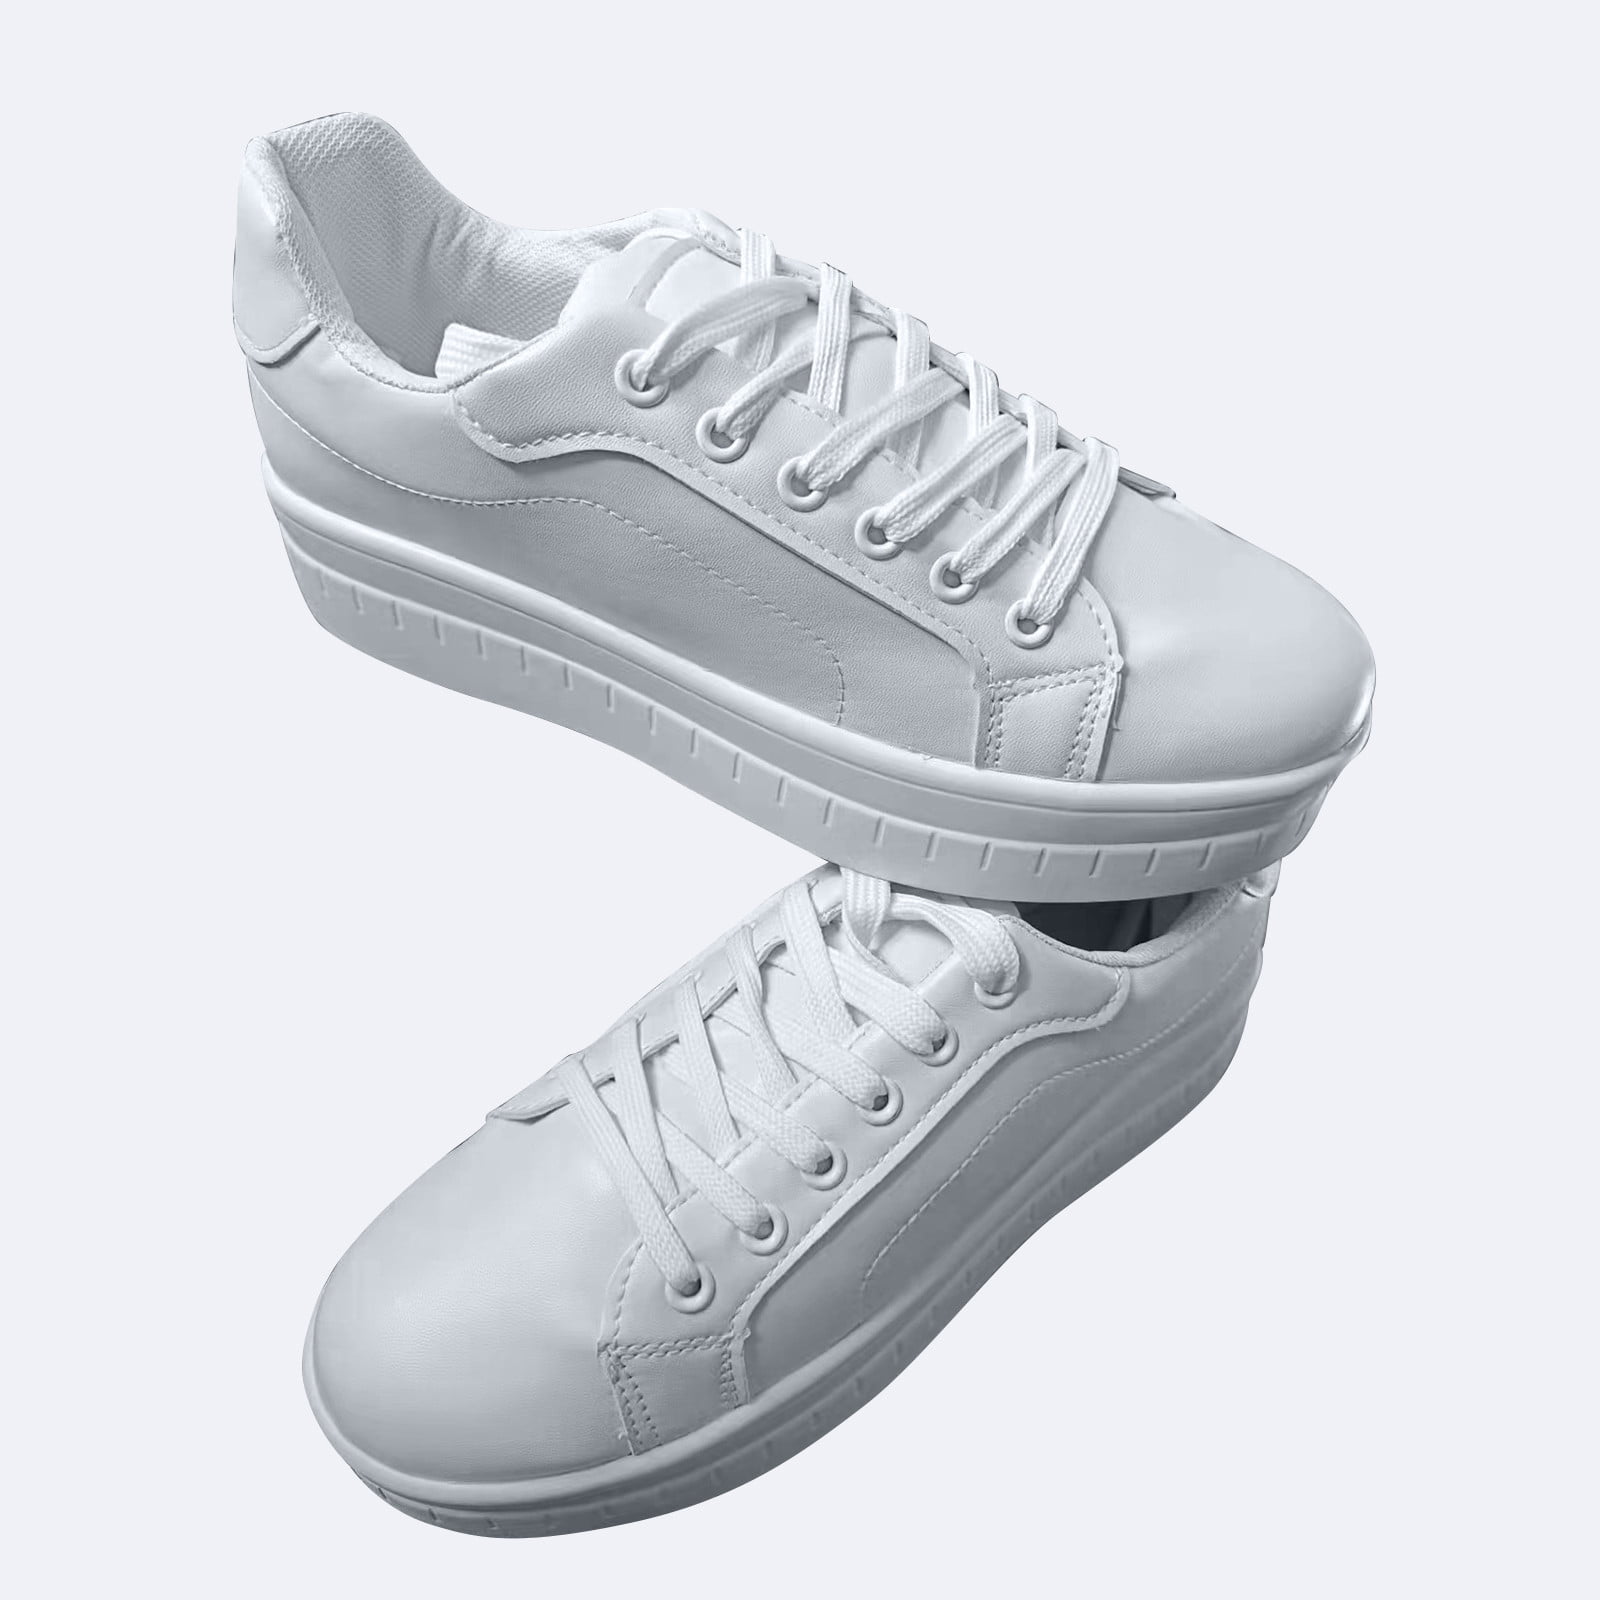 Adrint Sneakers Royal white sneaker, Size: 6-10 at Rs 499/pair in Agra